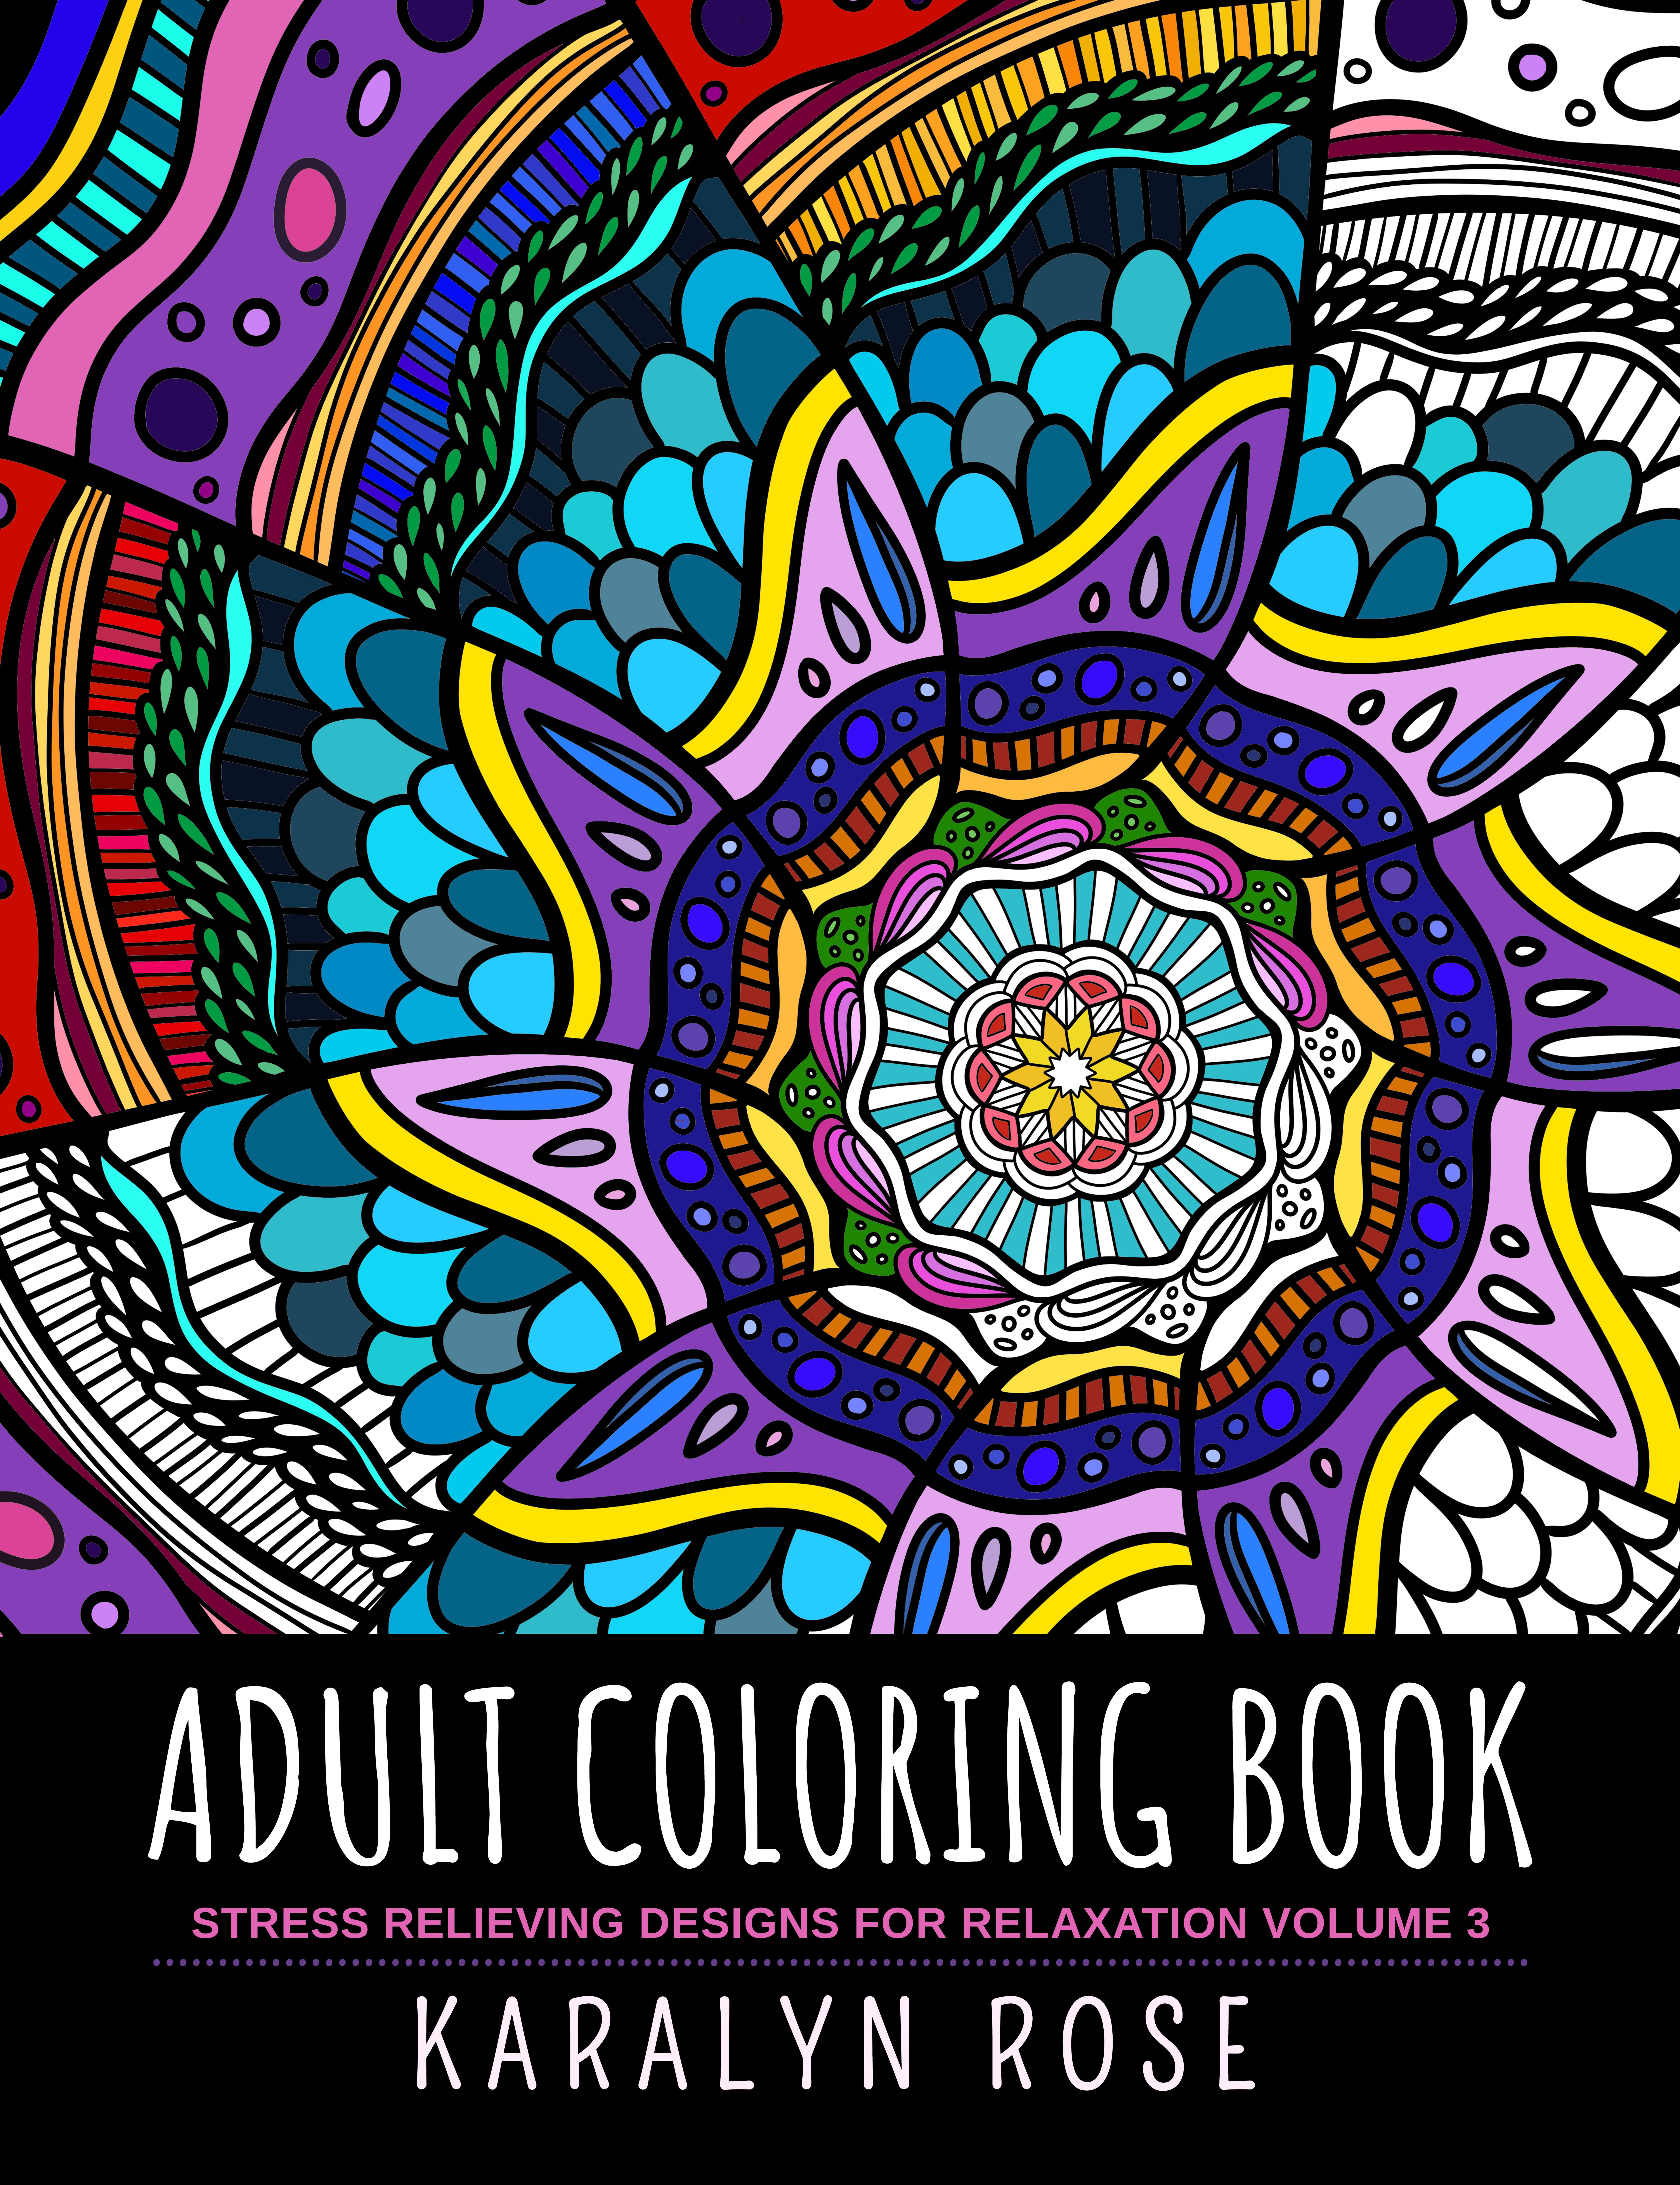 Adult Coloring Book: Stress Relieving Designs for Relaxation Volume 3